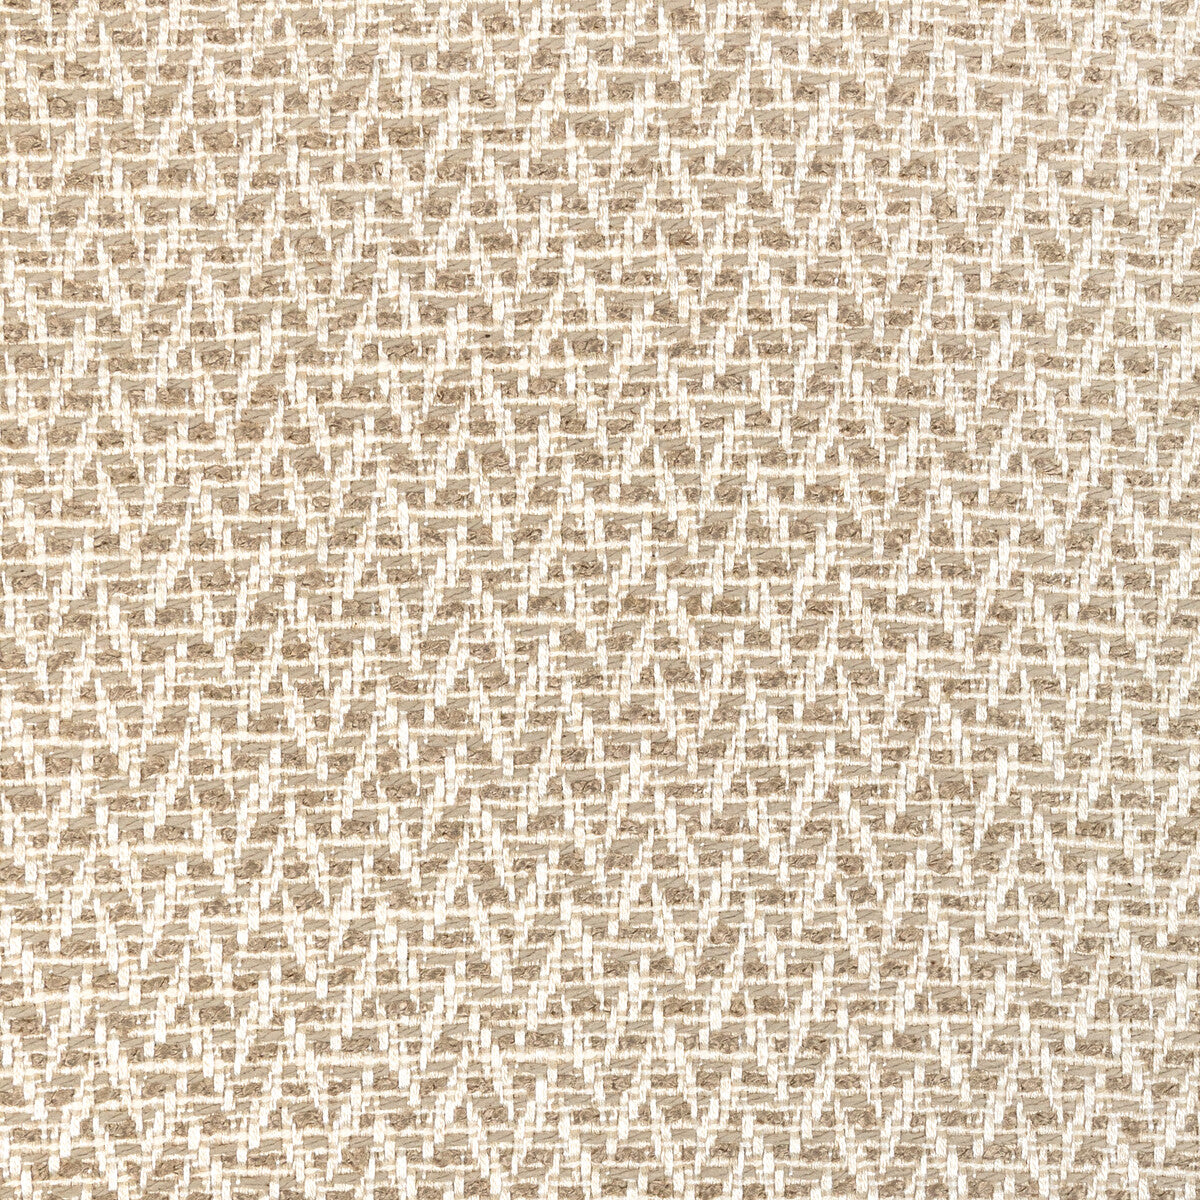 Kravet Design fabric in 36418-11 color - pattern 36418.11.0 - by Kravet Design in the Performance Crypton Home collection